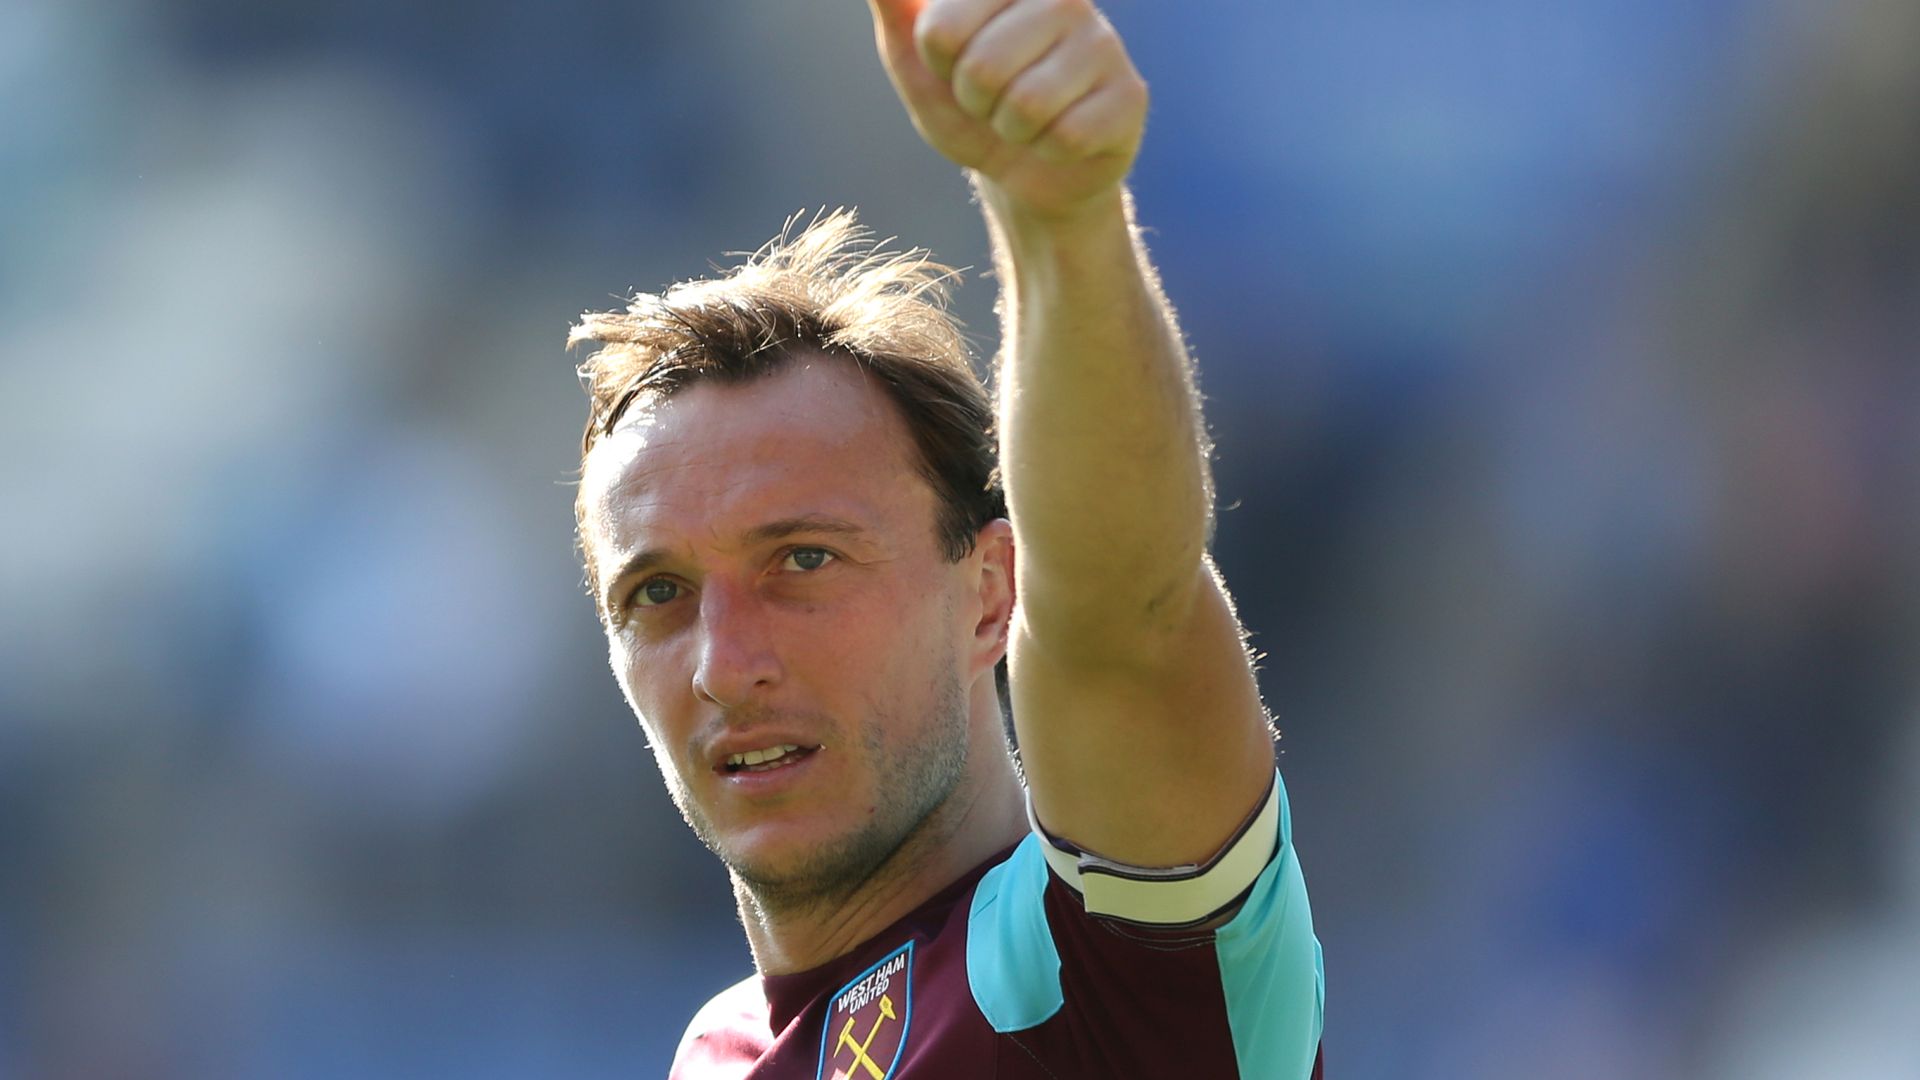 Noble to end playing time at West Ham next season